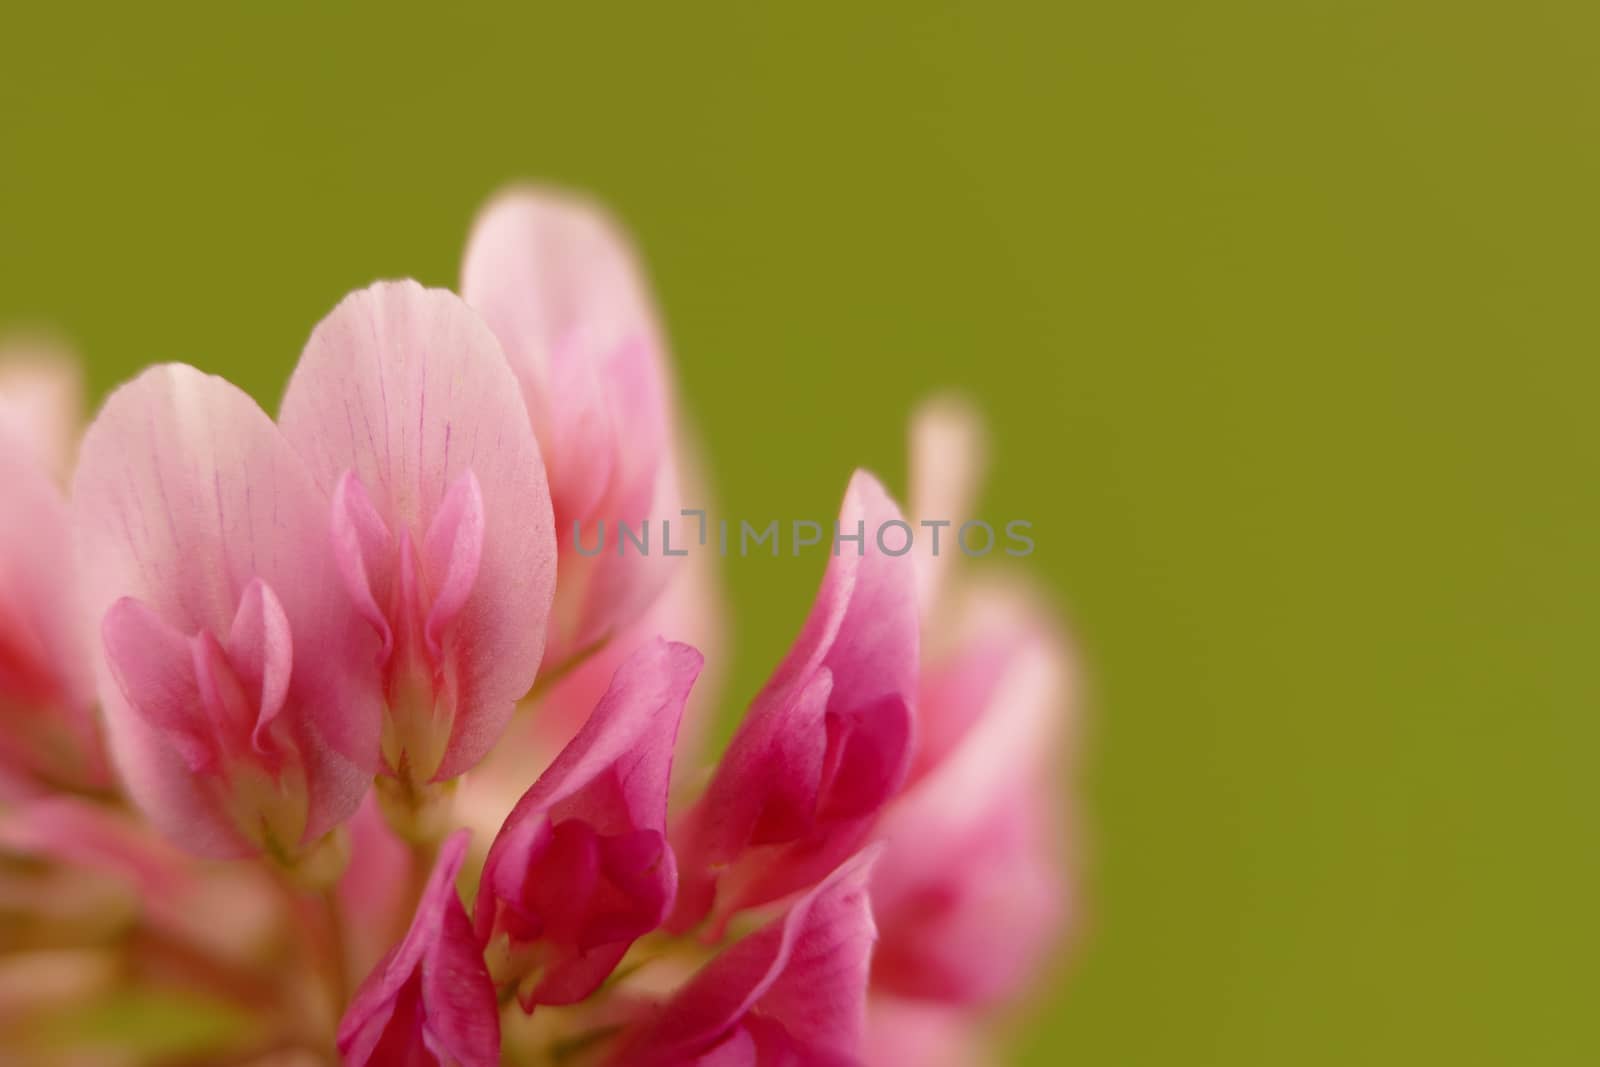 close-up of a pink clover flower on blurry green background